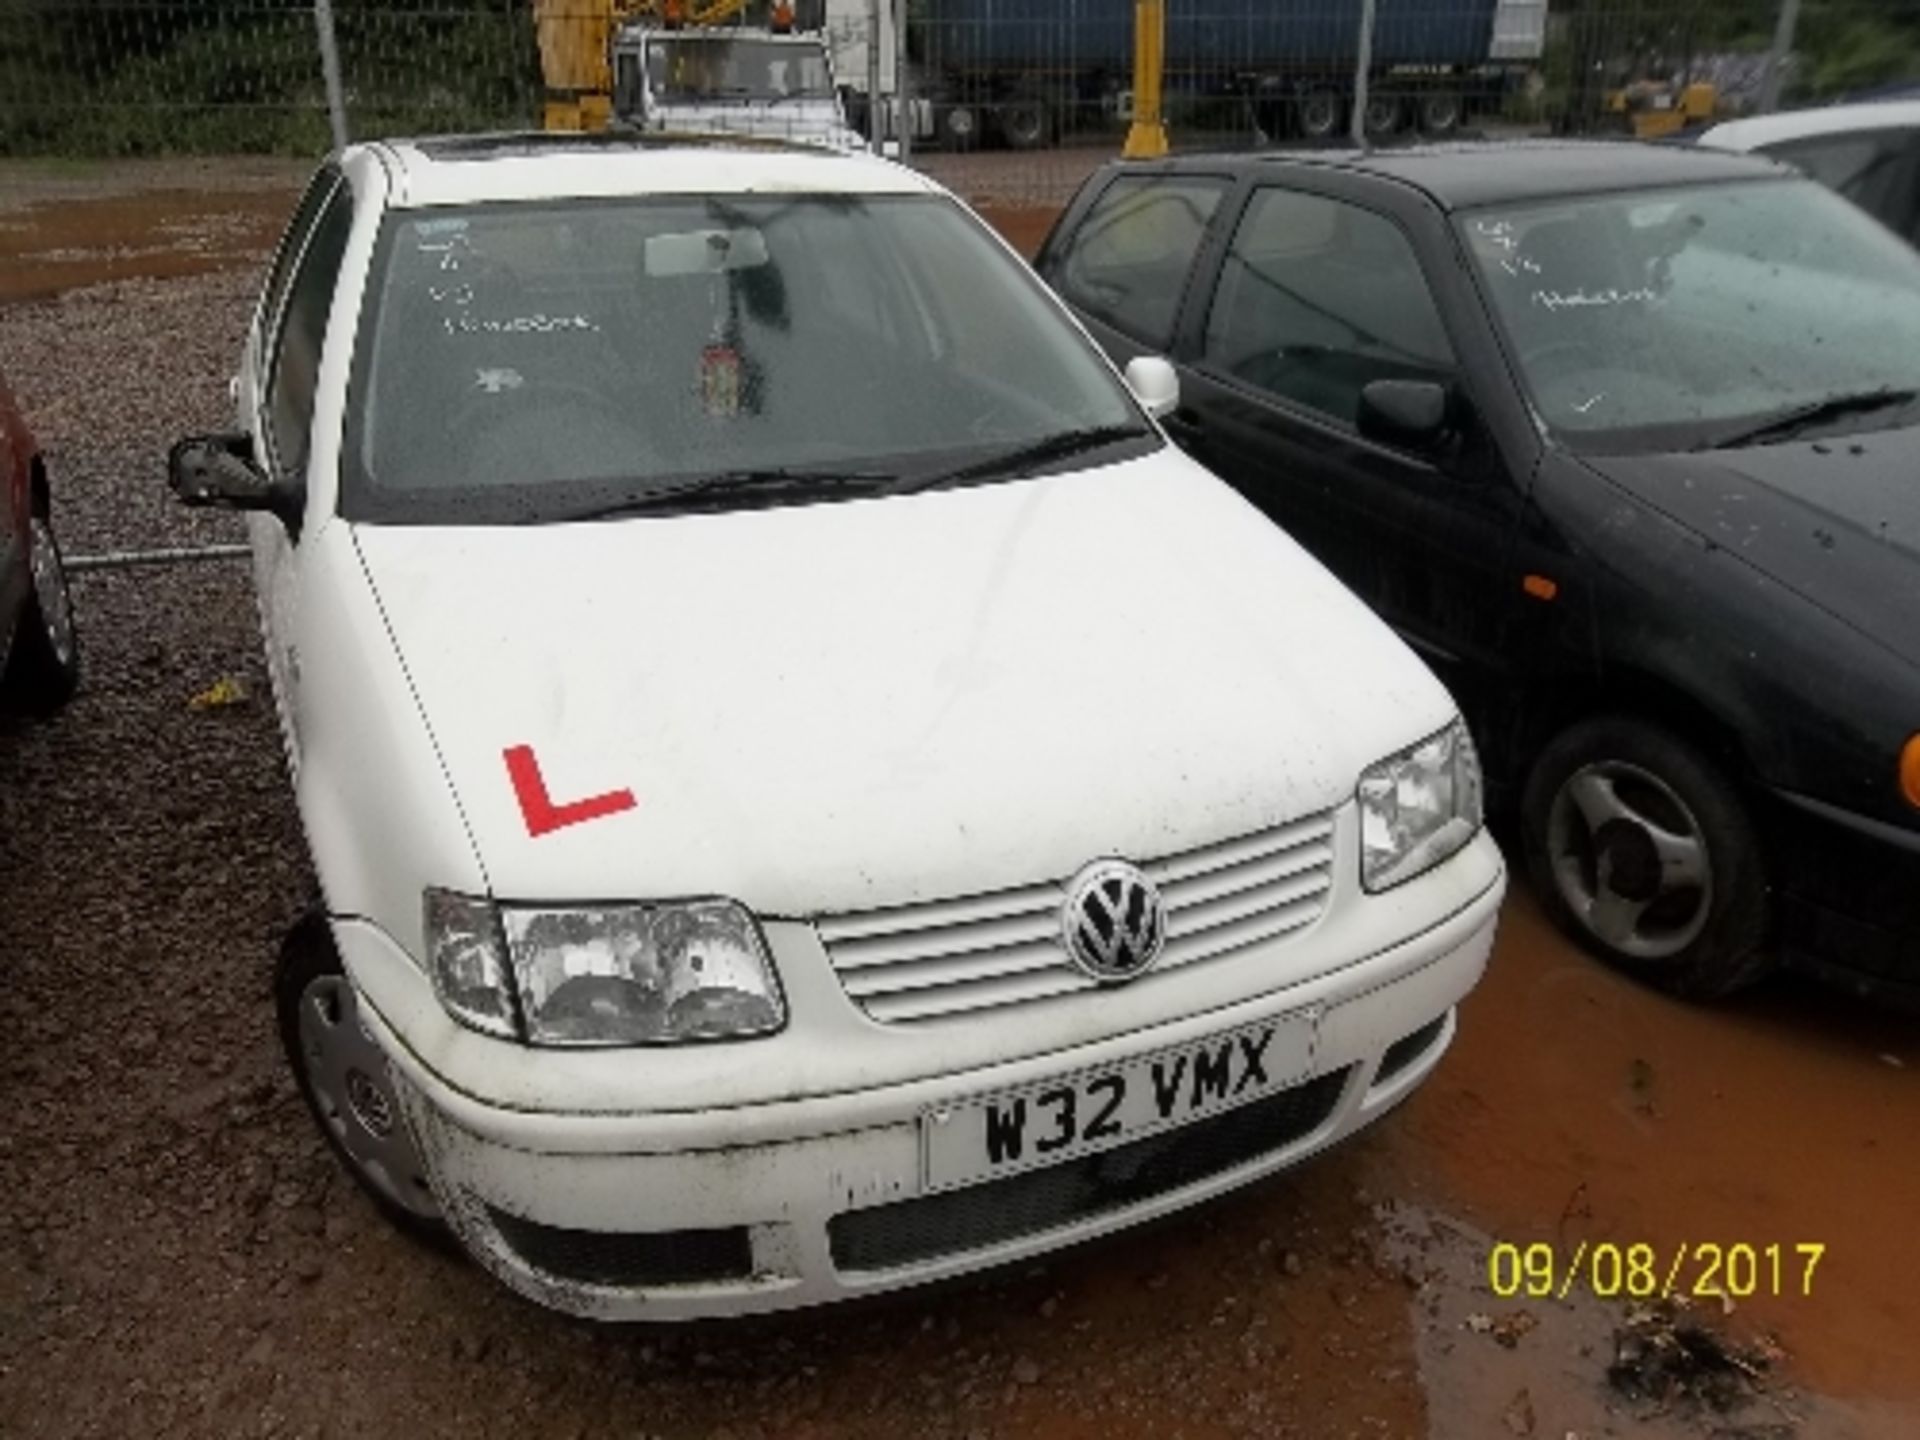 Volkswagen Polo S - W32 VMX Date of registration: 15.06.2000 1400cc, petrol, manual, white